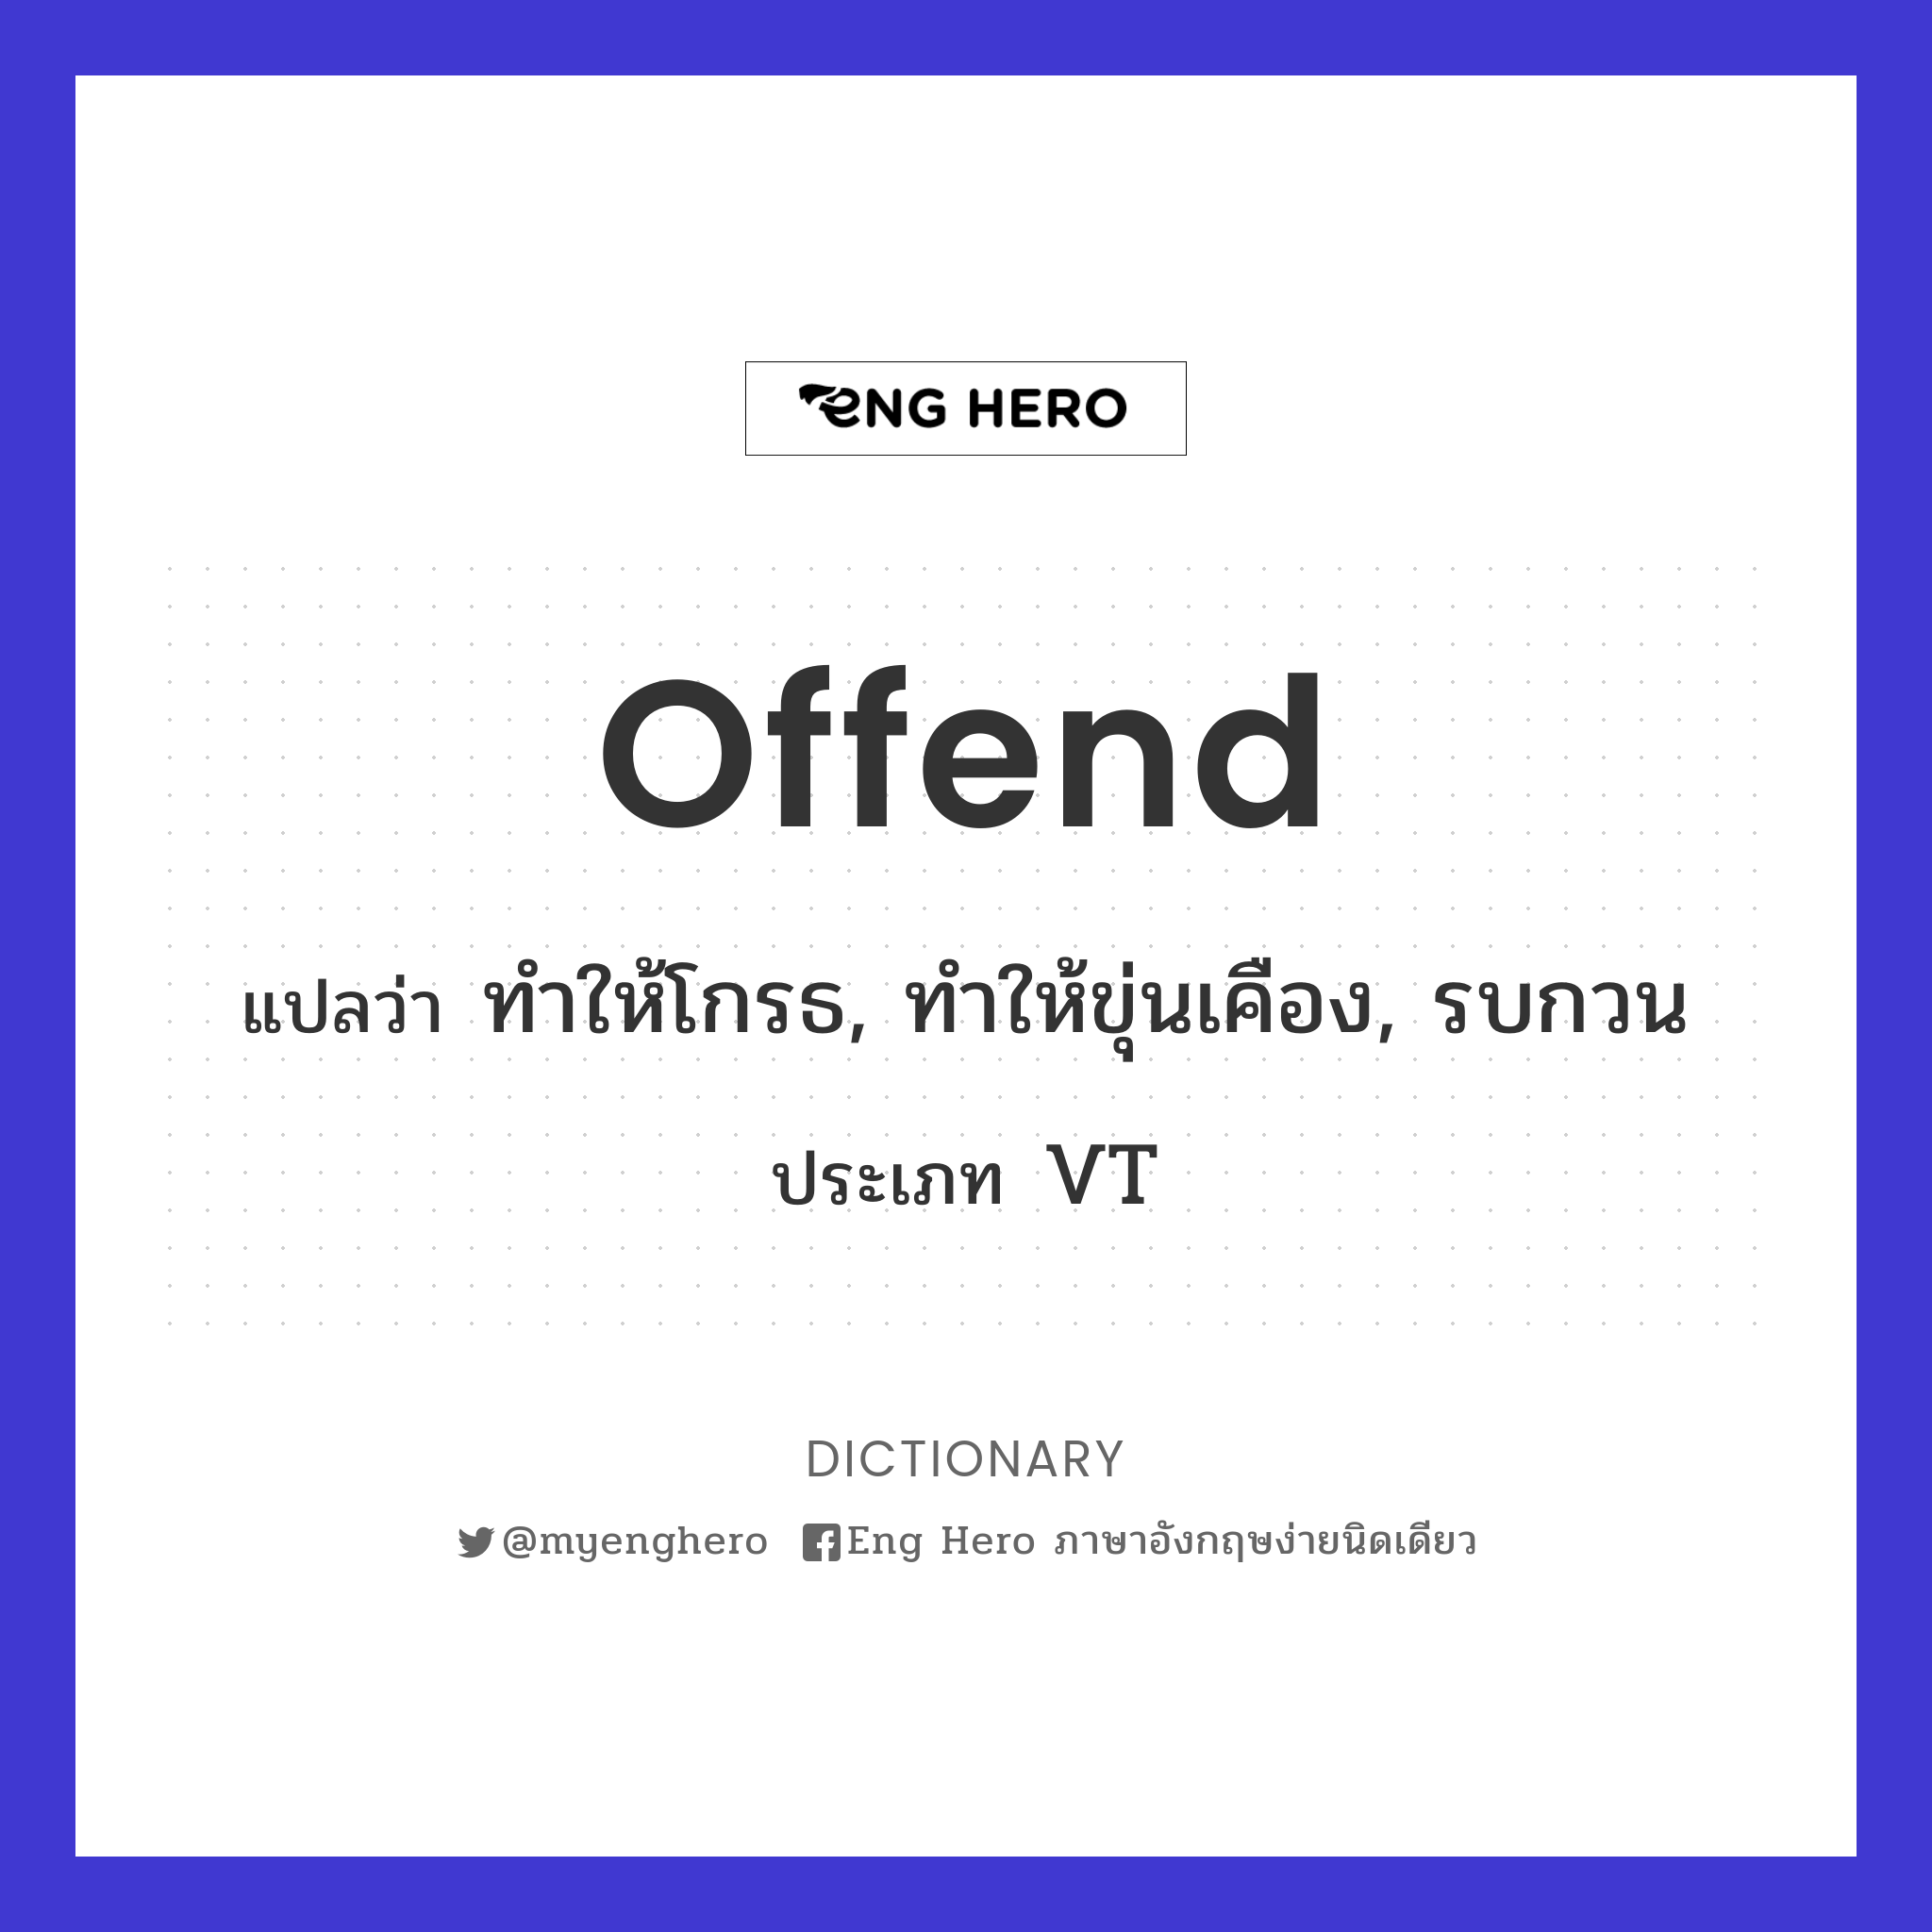 offend